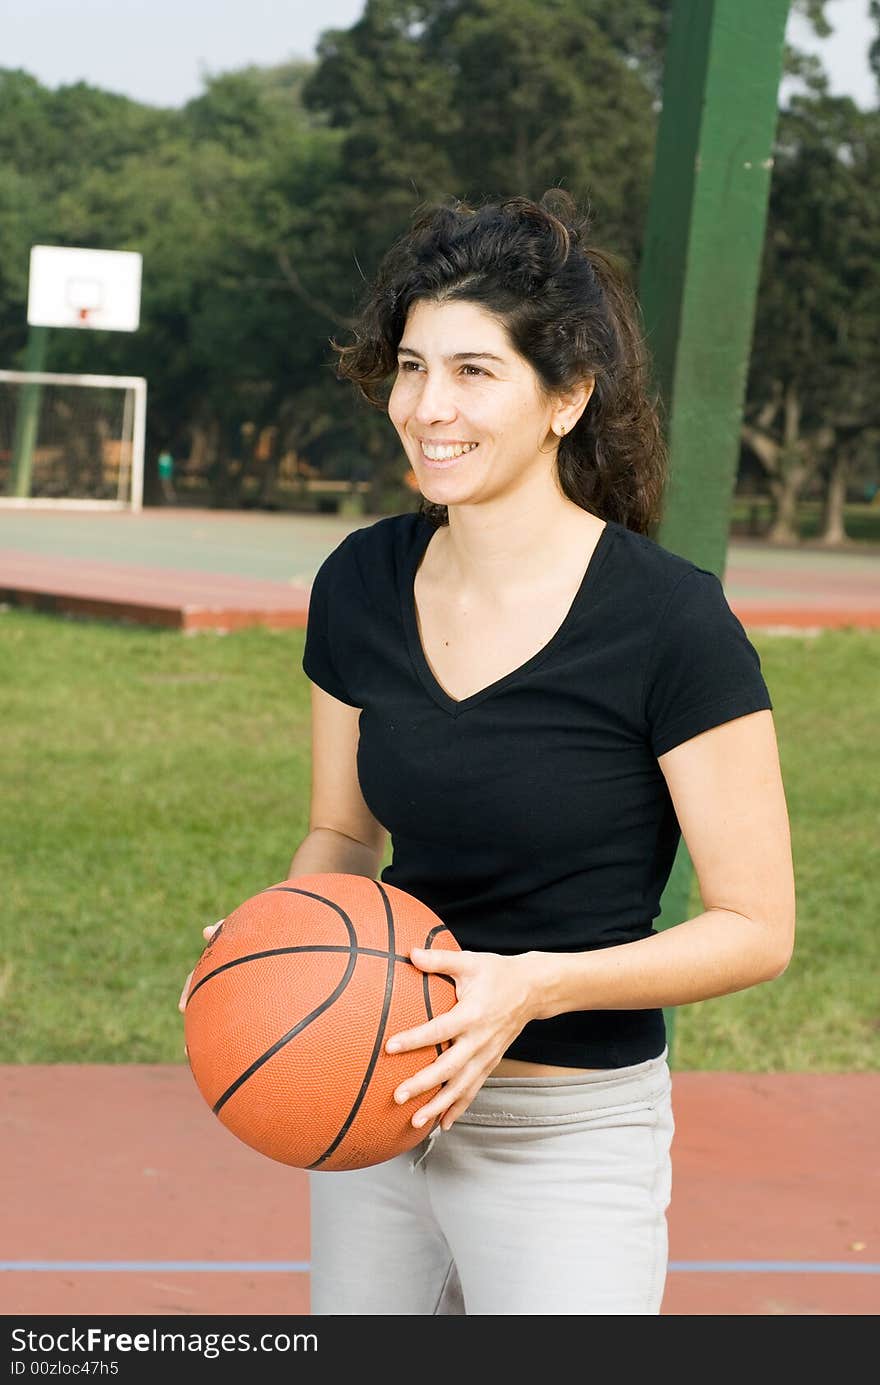 Young, attractive, happy woman is standing on an outdoor basketball court.  She is holding a basketball and looking in the other direction.  Vertically framed shot. Young, attractive, happy woman is standing on an outdoor basketball court.  She is holding a basketball and looking in the other direction.  Vertically framed shot.